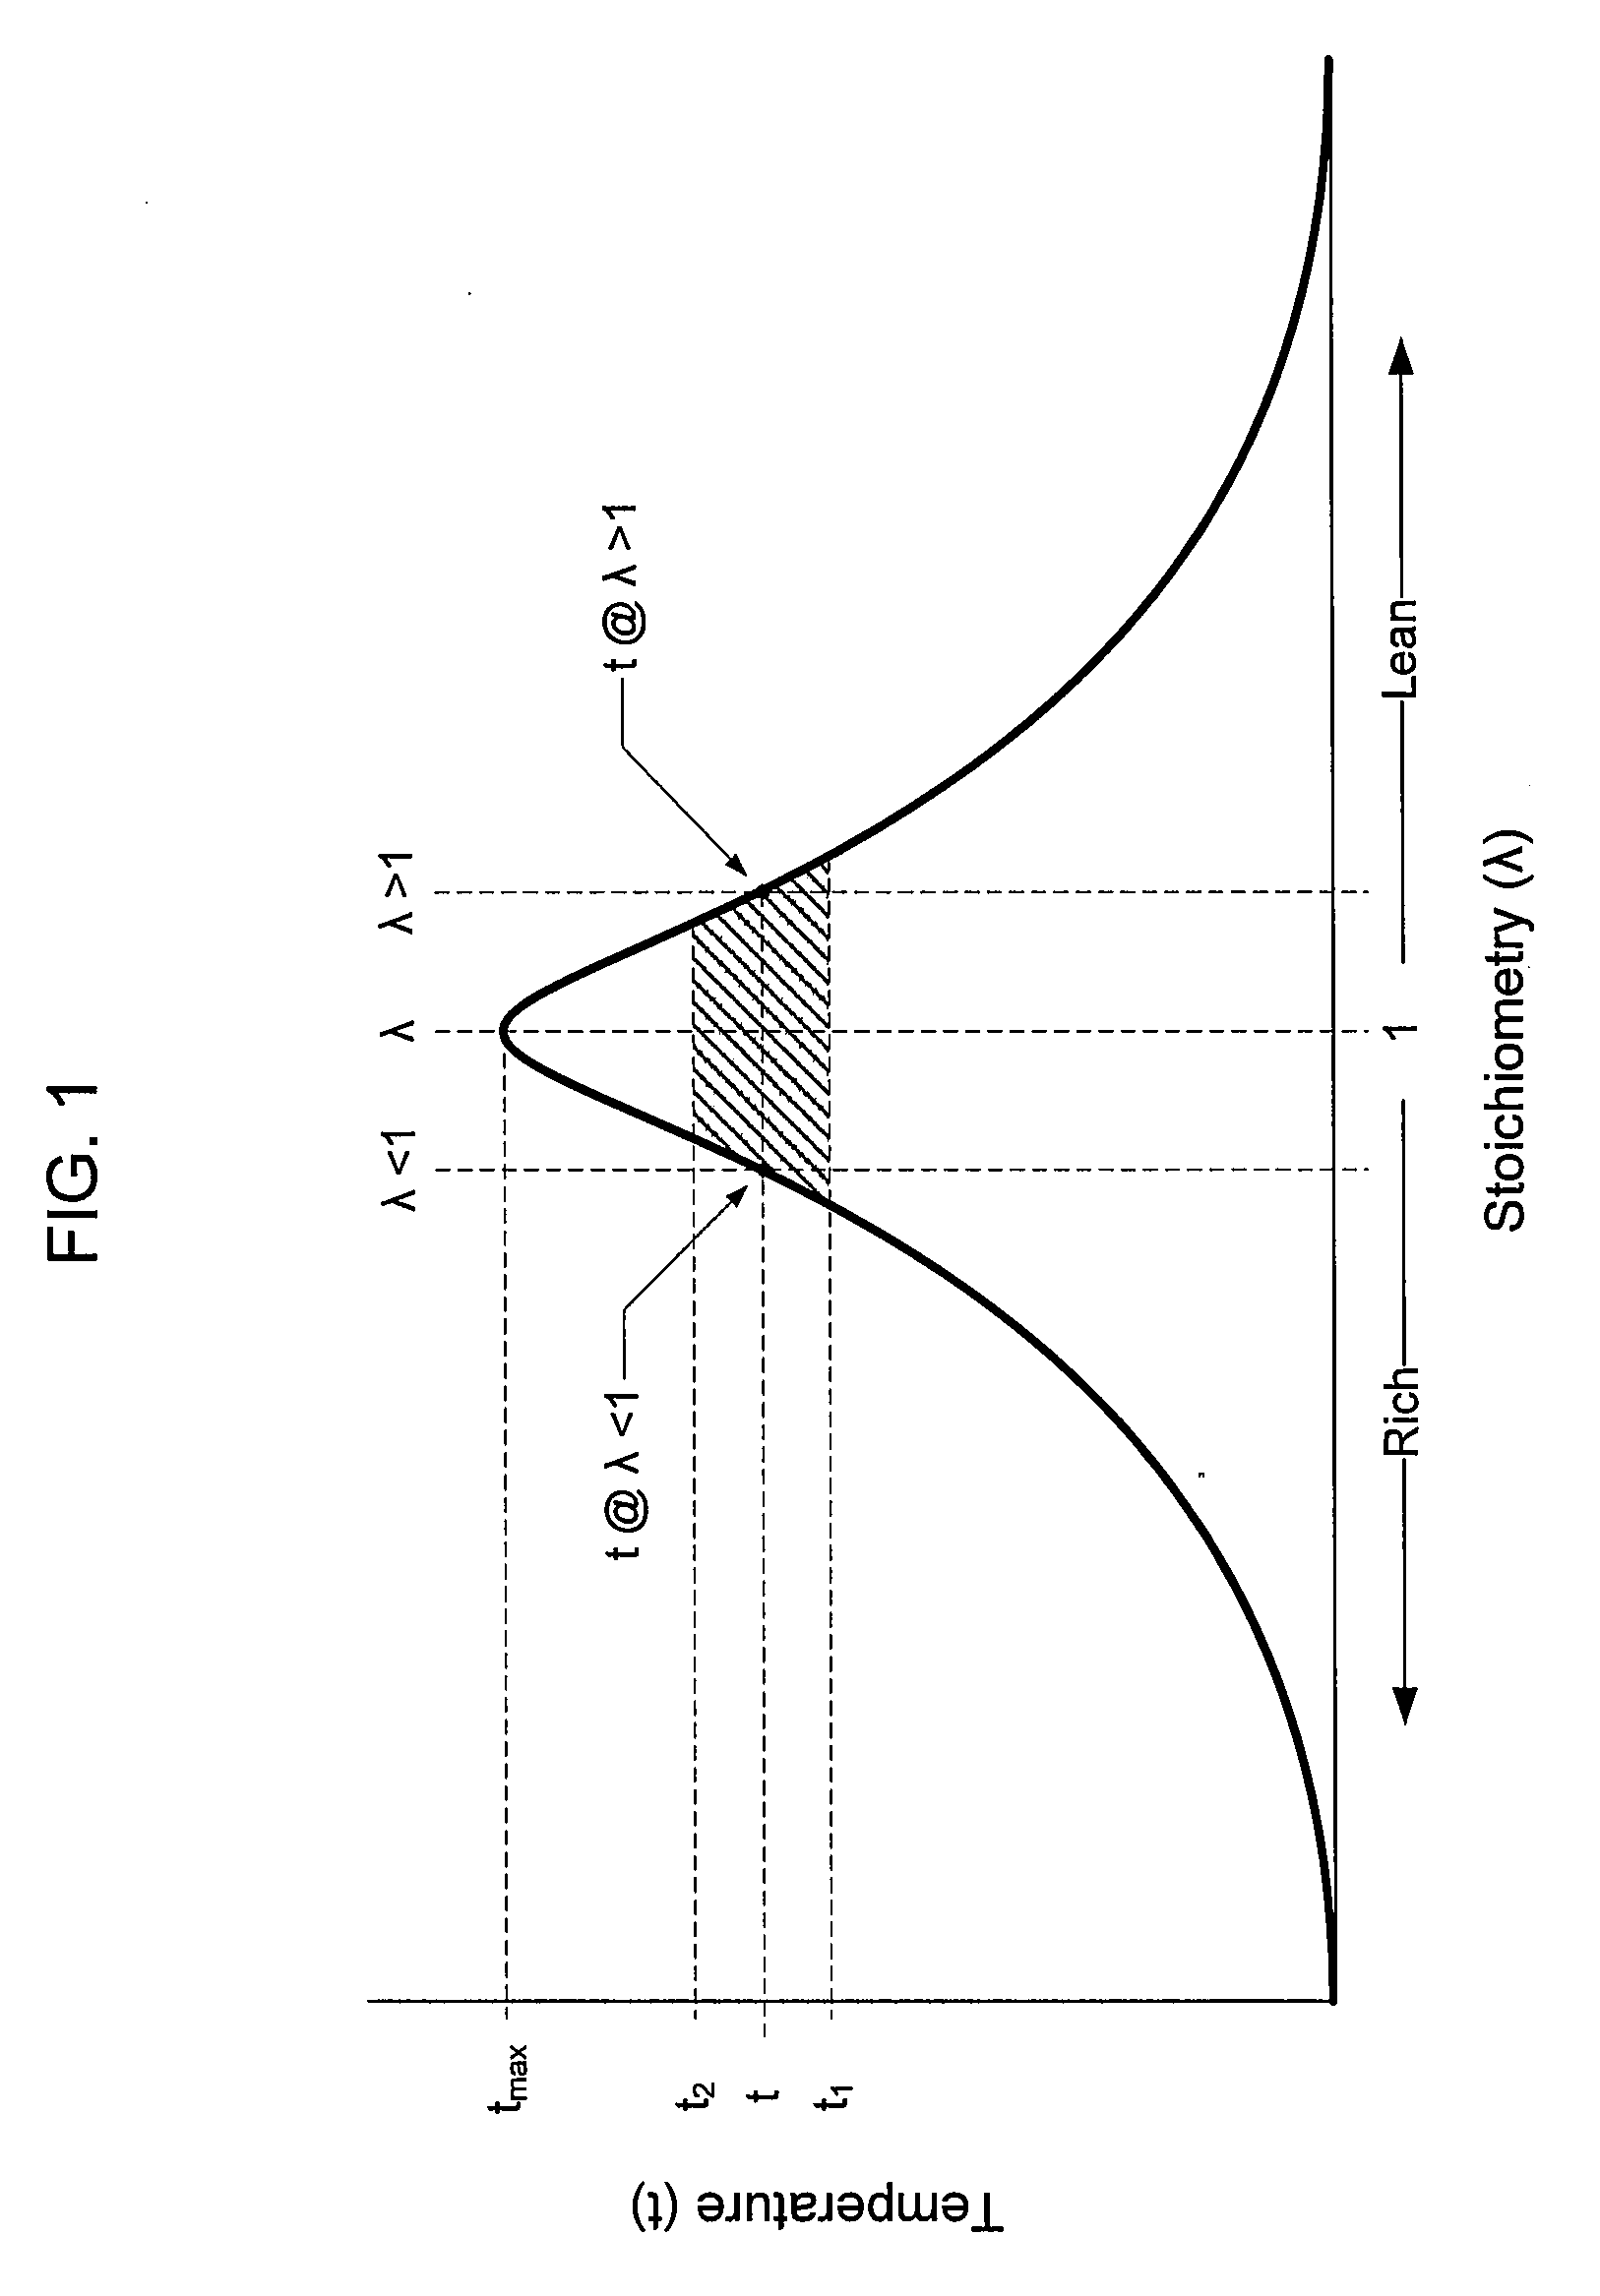 Method of operating a syngas generator